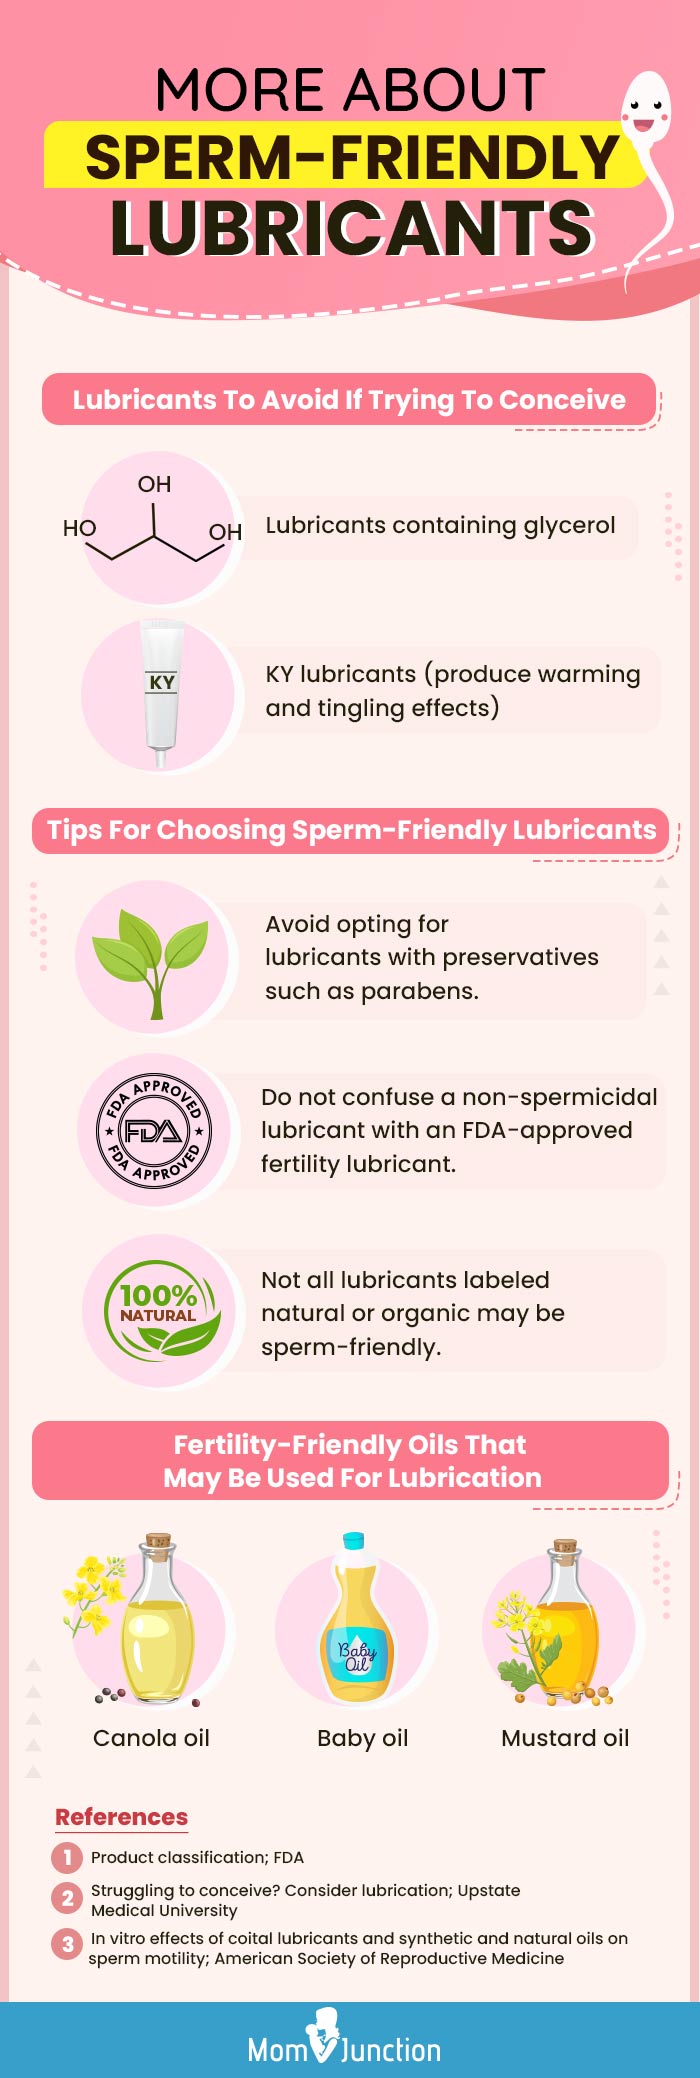 more about sperm friendly lubricants [infographic]